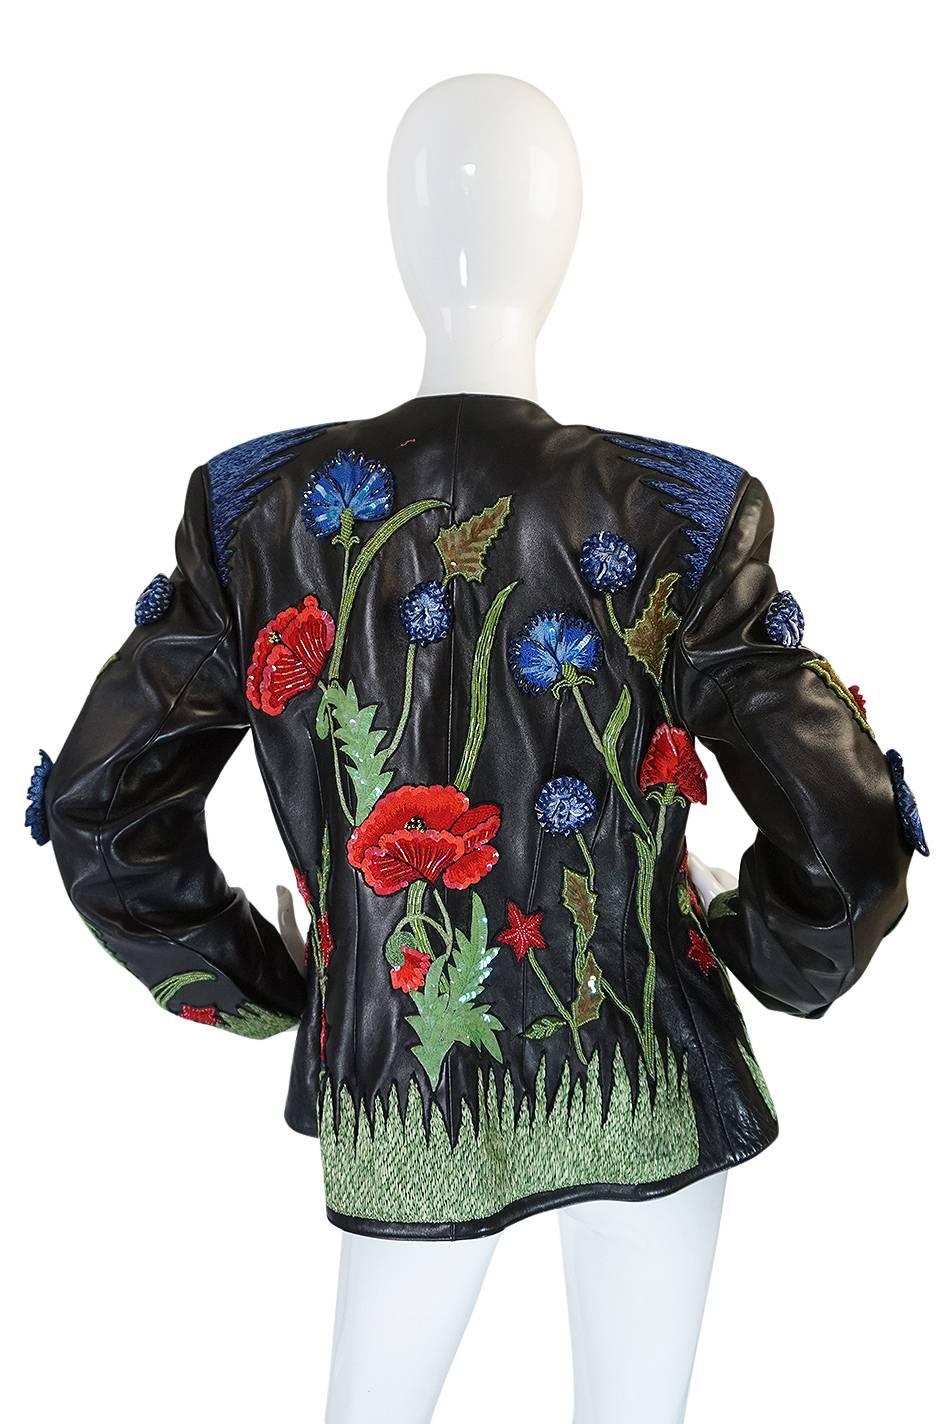 

The embroidery work on this butter soft, black leather jacket is exquisite. The work is all done by Lesage and it is mind boggling in person. I have tried to capture the dimension and 3D aspect of it with my camera but it just does not convey